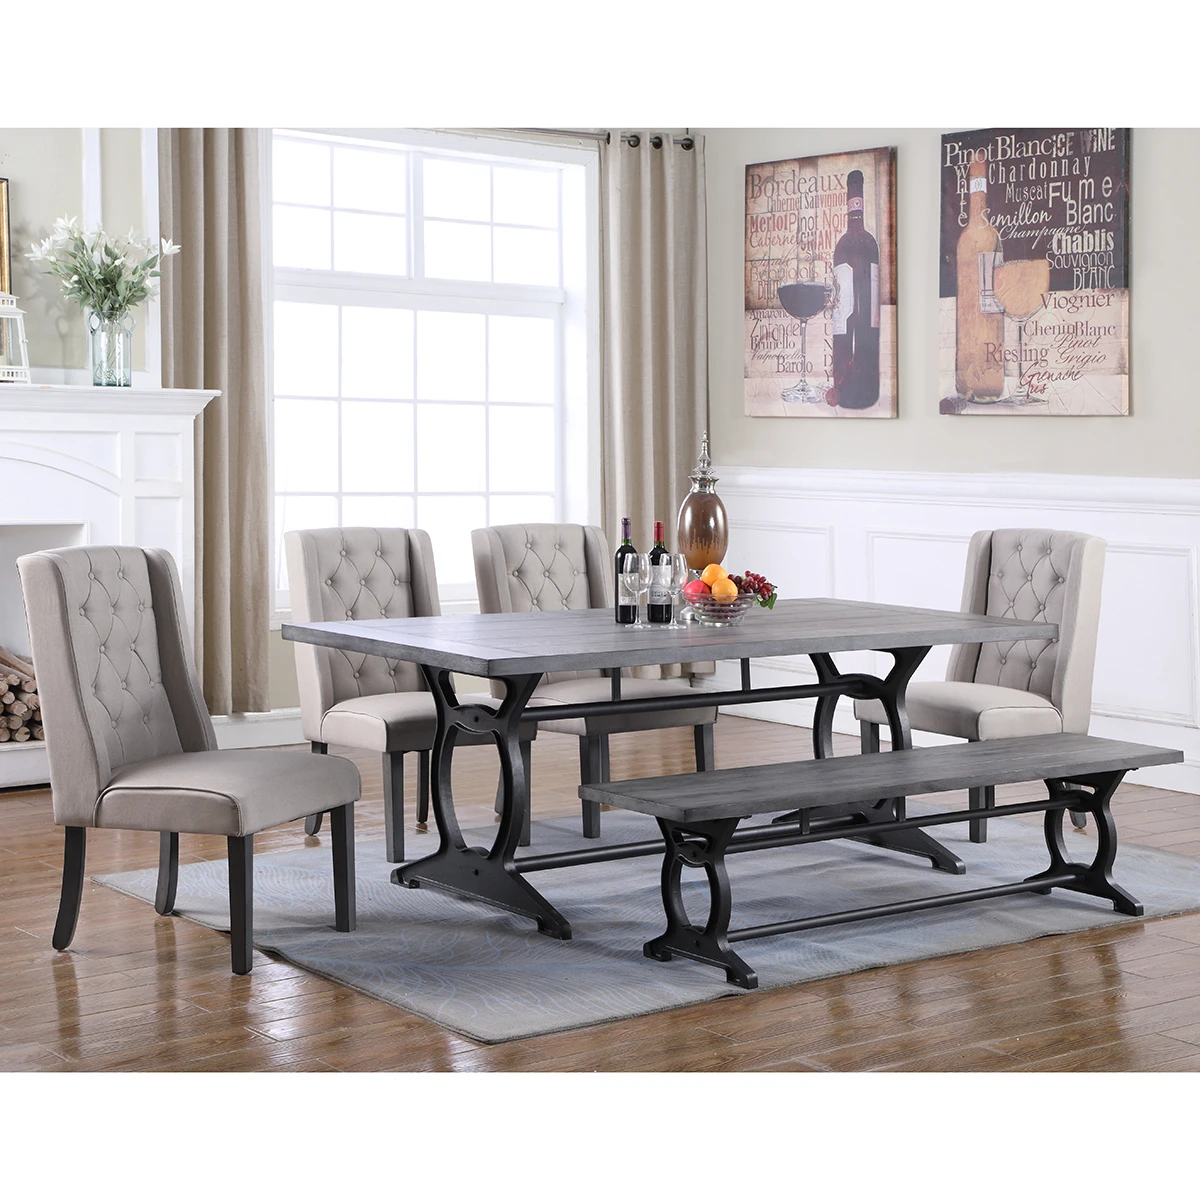 Modern Luxury Wooden Dining Room Furniture Design Long Rectangle Dining Tables Set with 4 Chairs and Bench